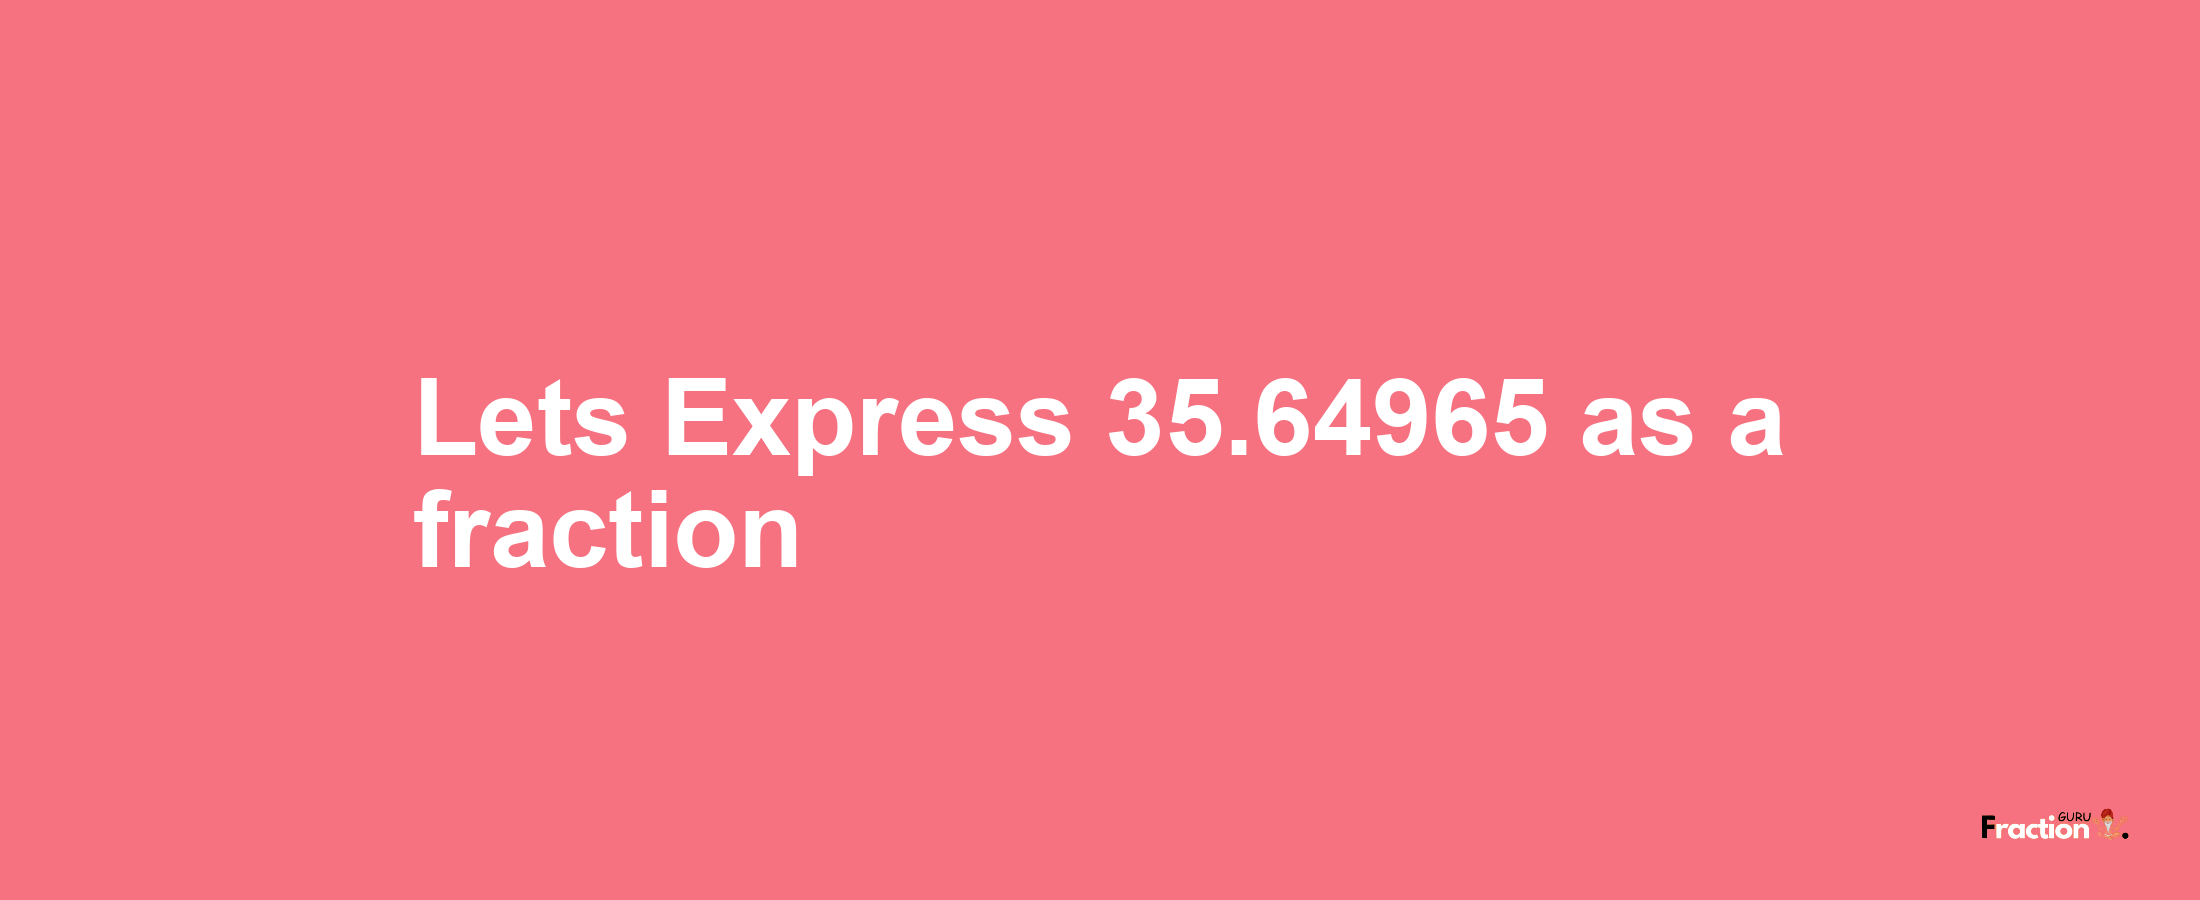 Lets Express 35.64965 as afraction